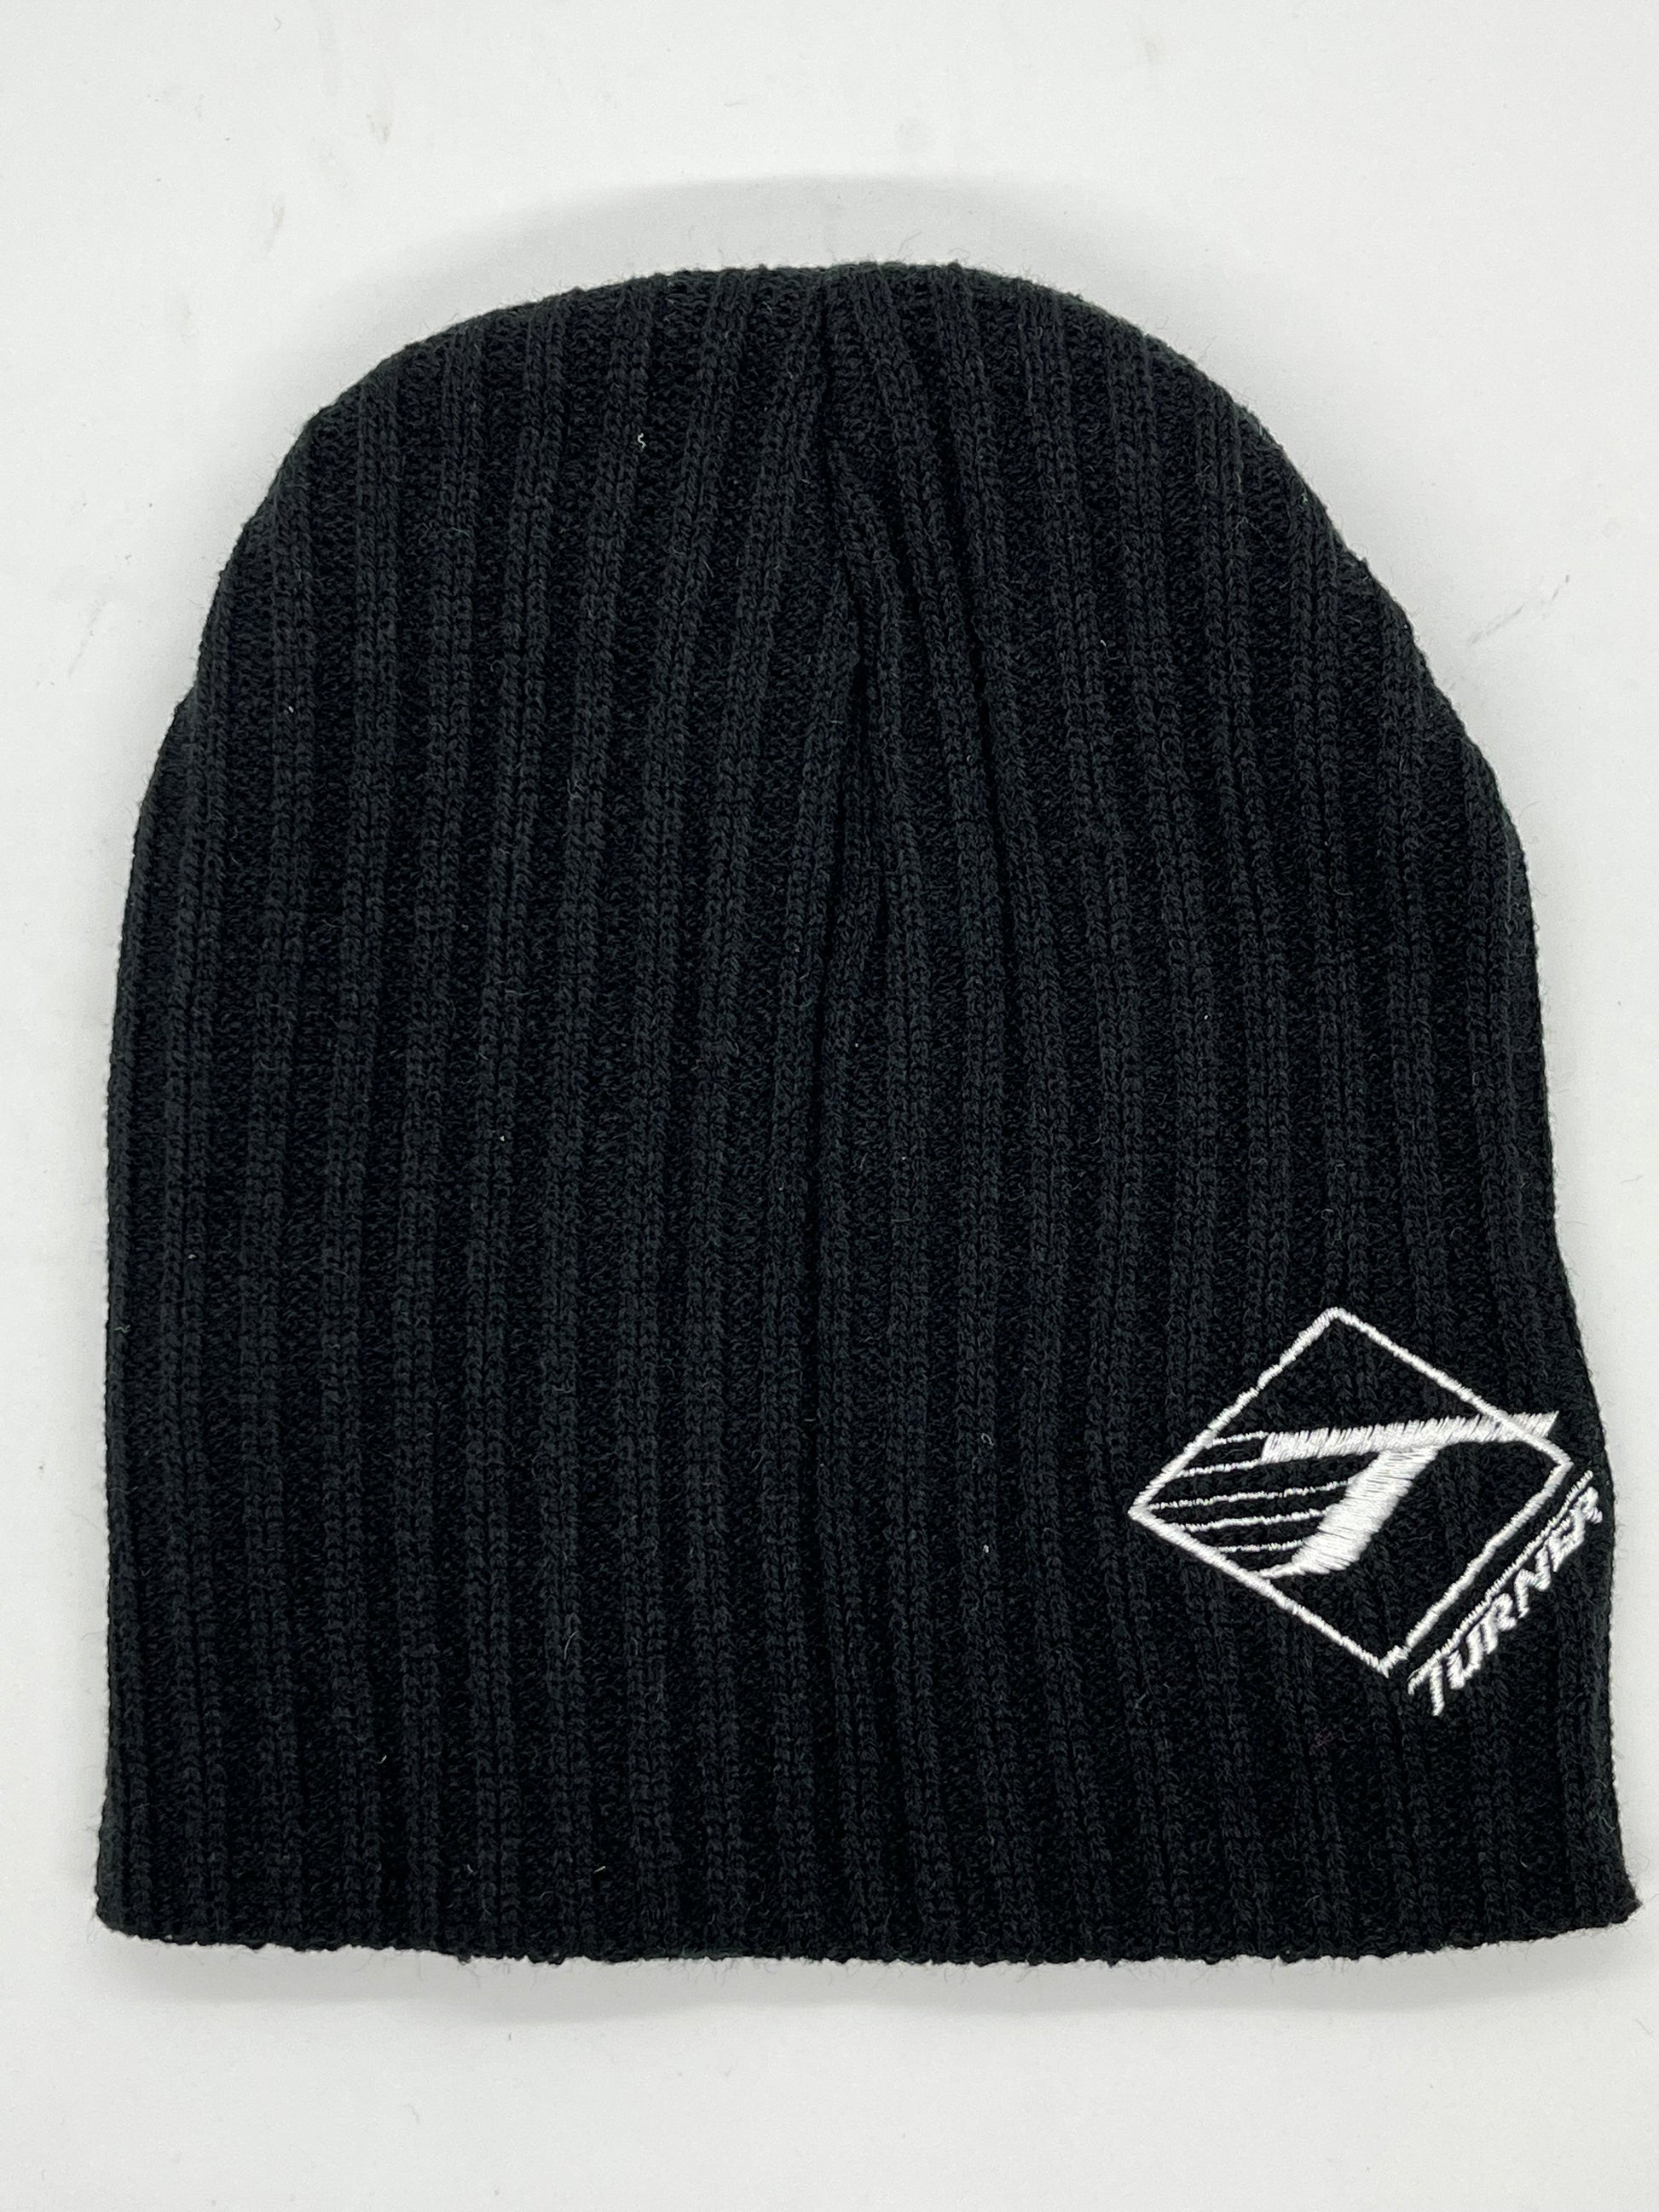 Simple black rib knit beanie with the classic Turner logo. 